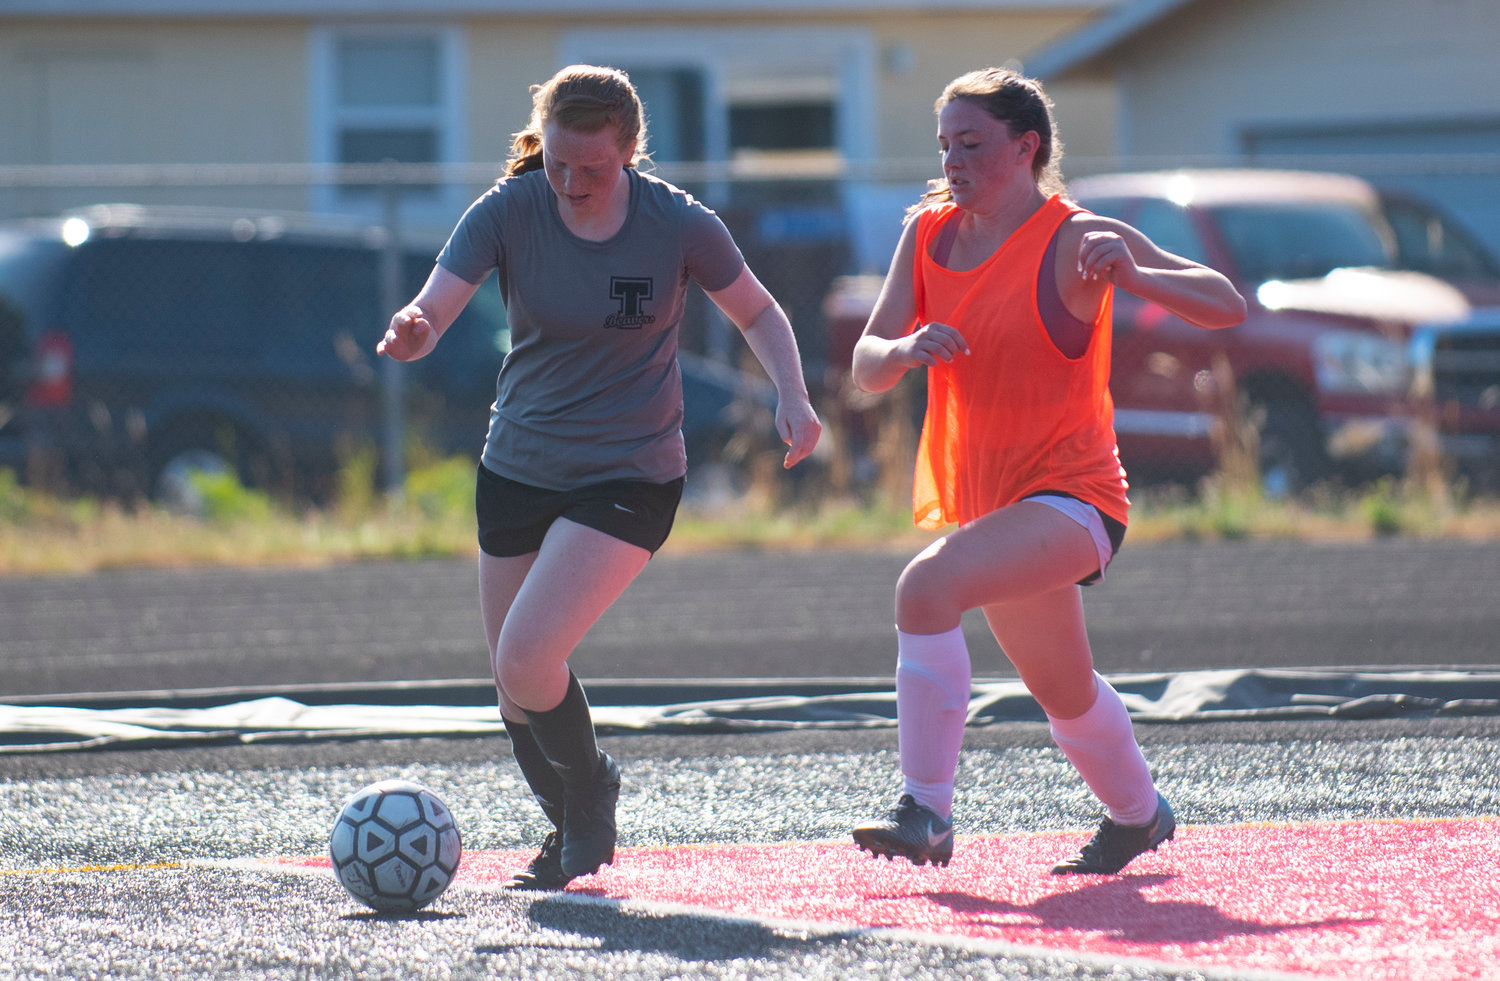 Tenino's Abby Severse, left, battles for possession with a Rochester player during the Battle on the Black Top tournament Thursday in Tenino.